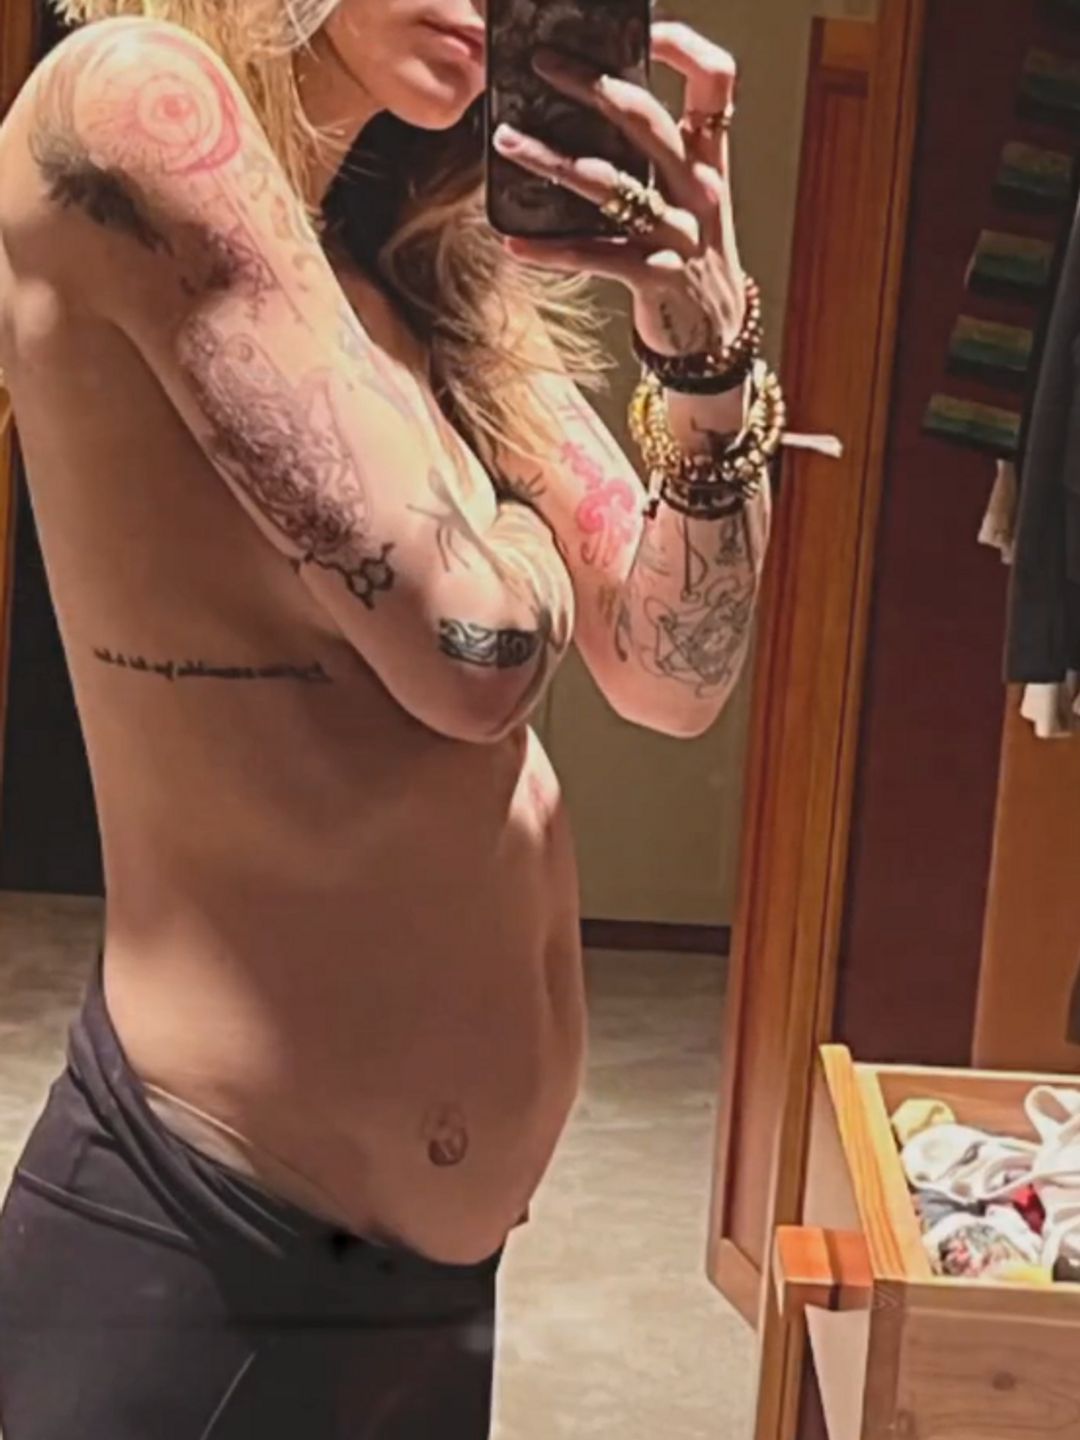 Paris Jackson taking a mirror selfie, her arm covering her naked chest, she is wearing leggings